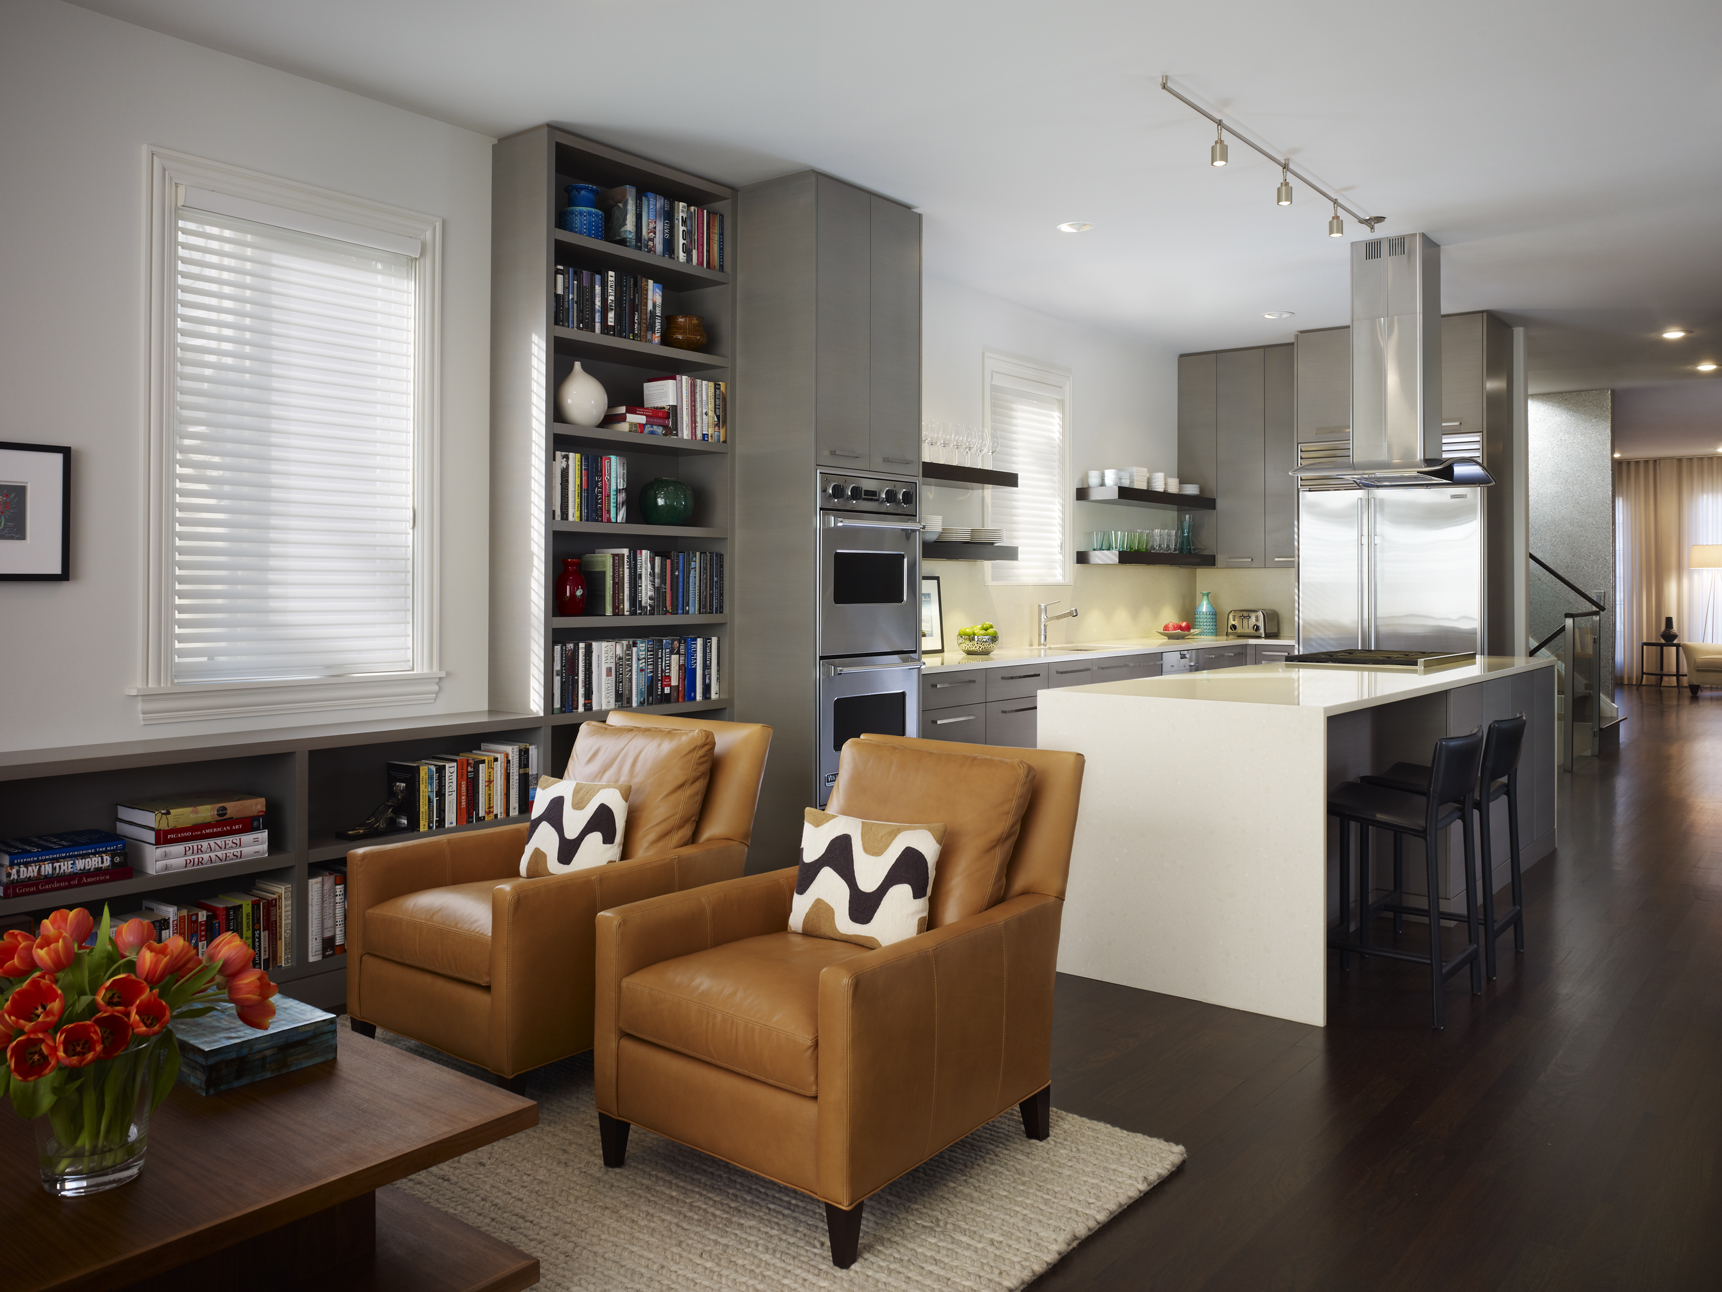 Modern Living Room Design: Breaking with One Past and Recalling Another